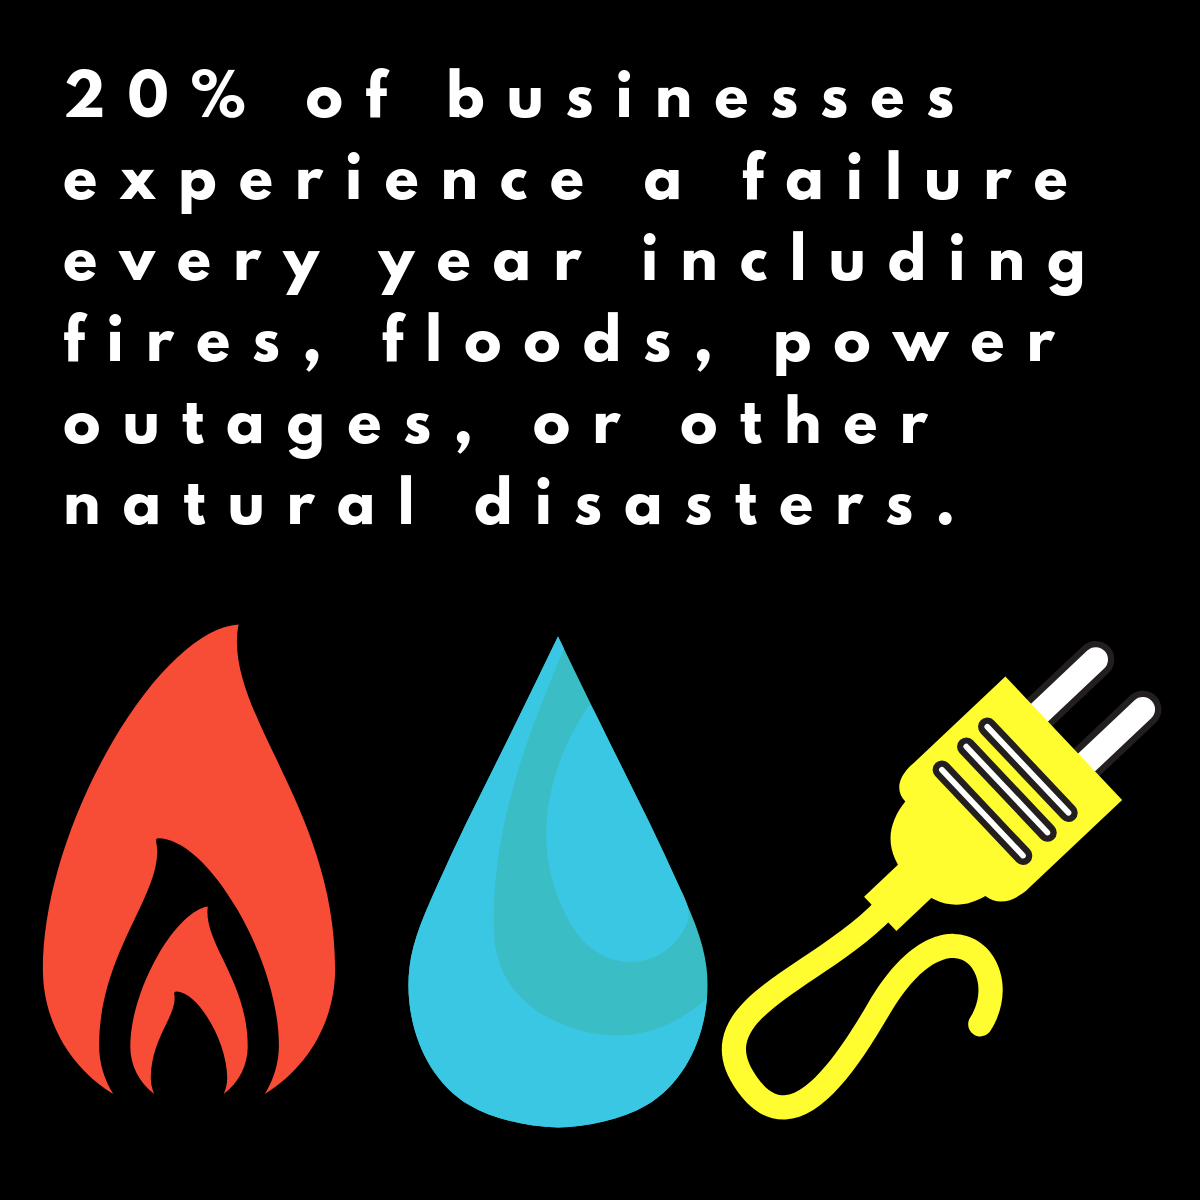 20% of businesses experience a failure every year including fires, floods, power outages, or other natural disasters.